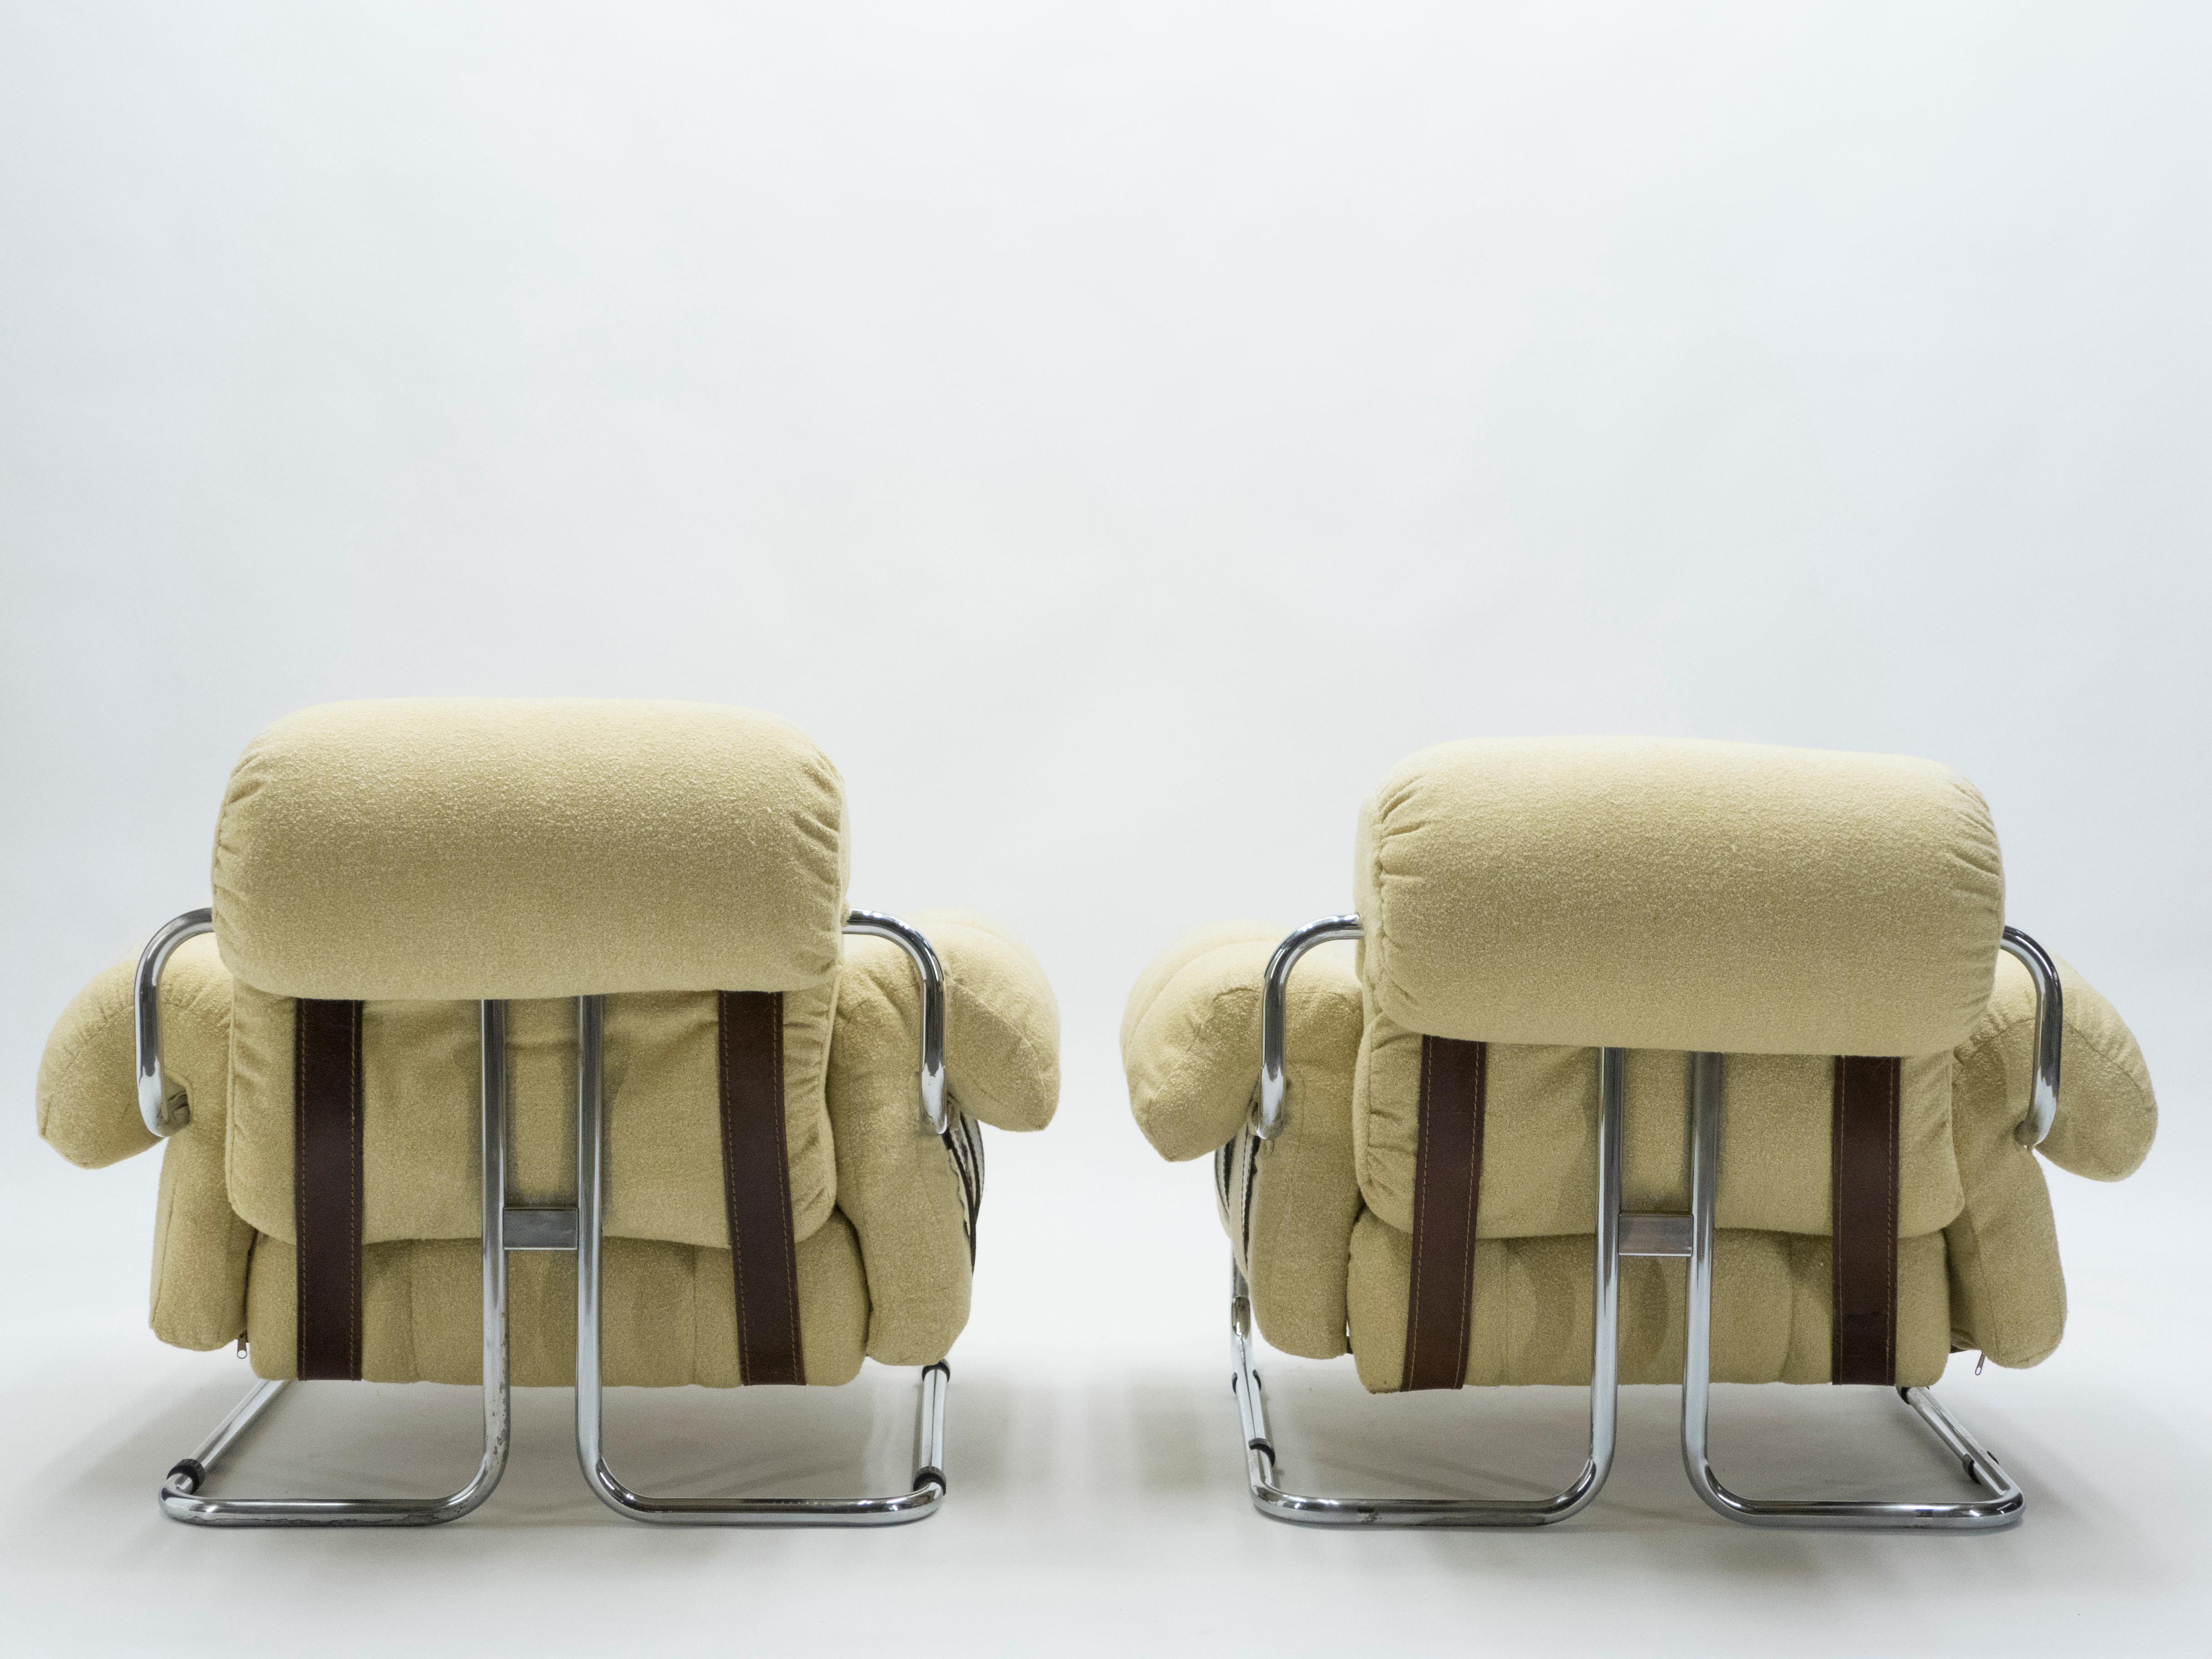 Late 20th Century Rare Pair of Italian “Tucroma” Armchairs by Guido Faleschini for Mariani, 1970s